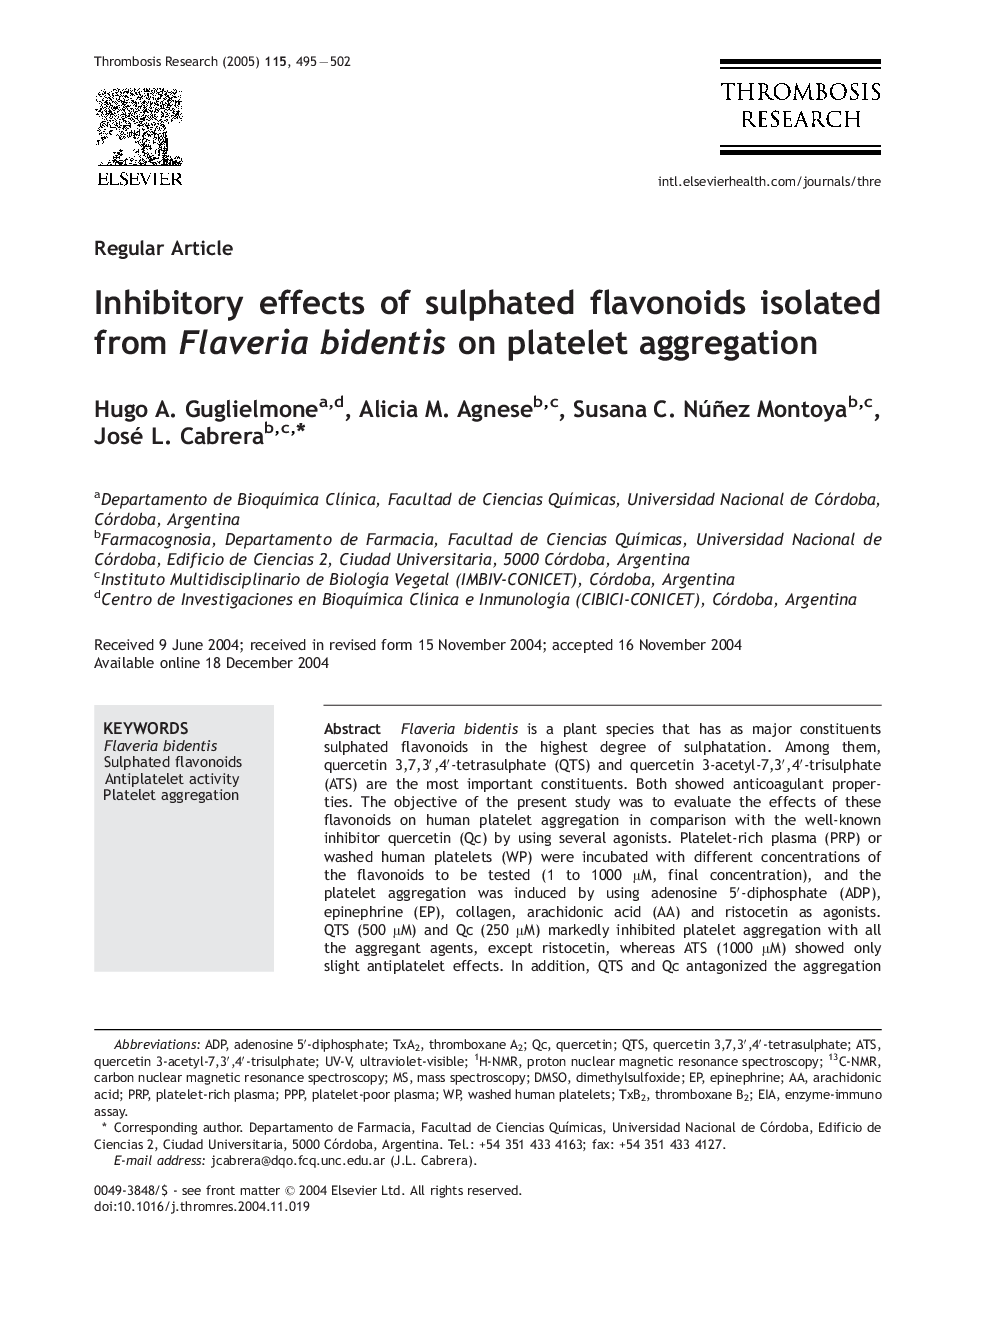 Inhibitory effects of sulphated flavonoids isolated from Flaveria bidentis on platelet aggregation